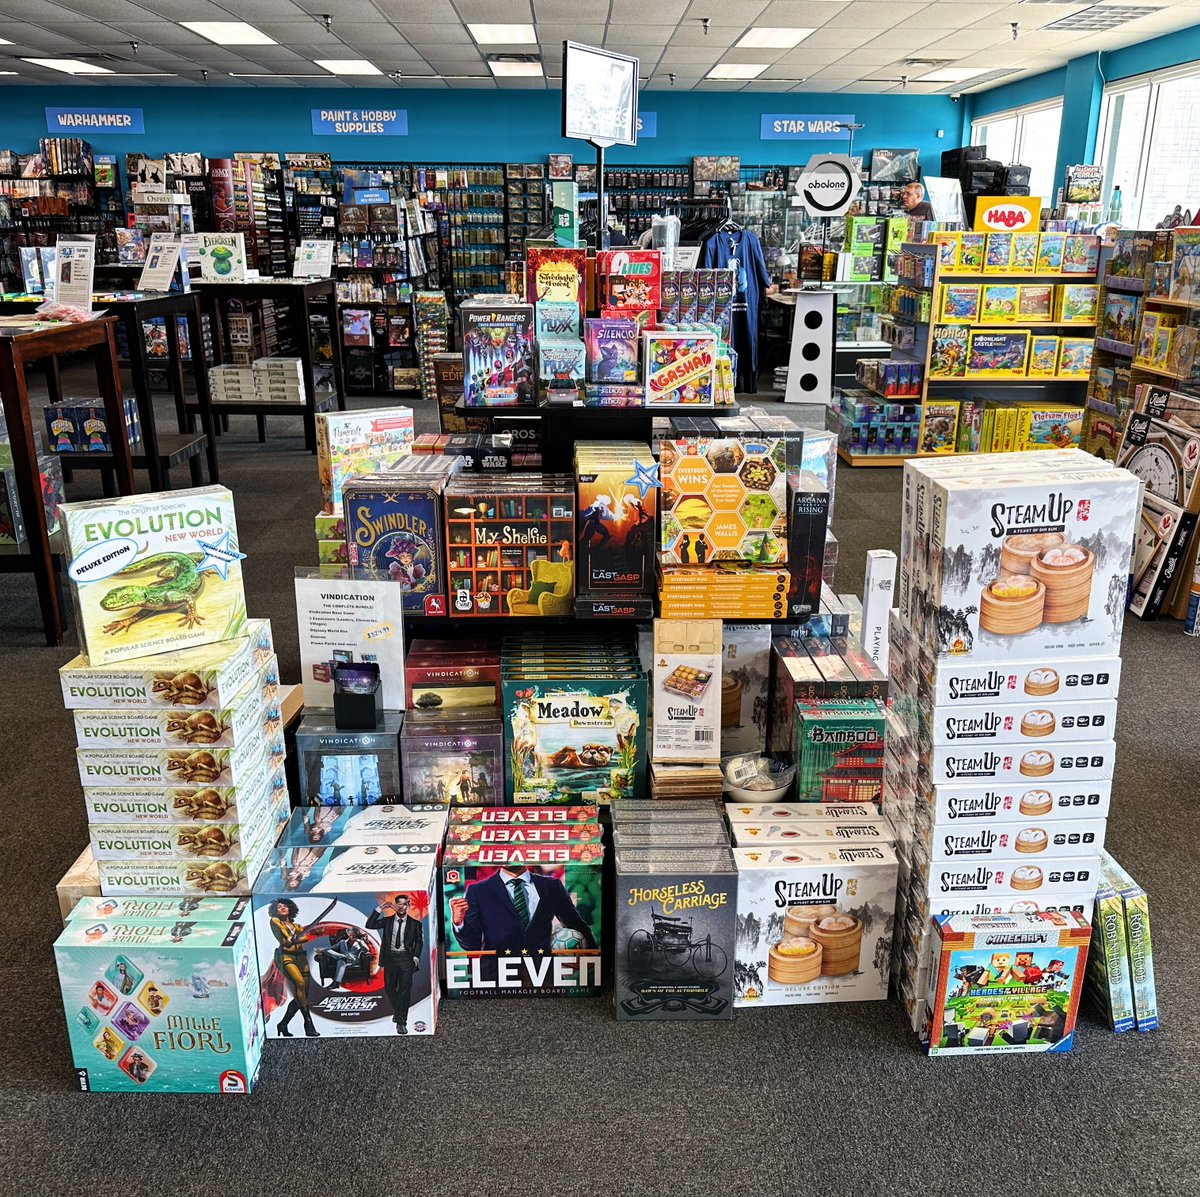 Great selection of the new releases, including our Eleven at Games and Stuff! 